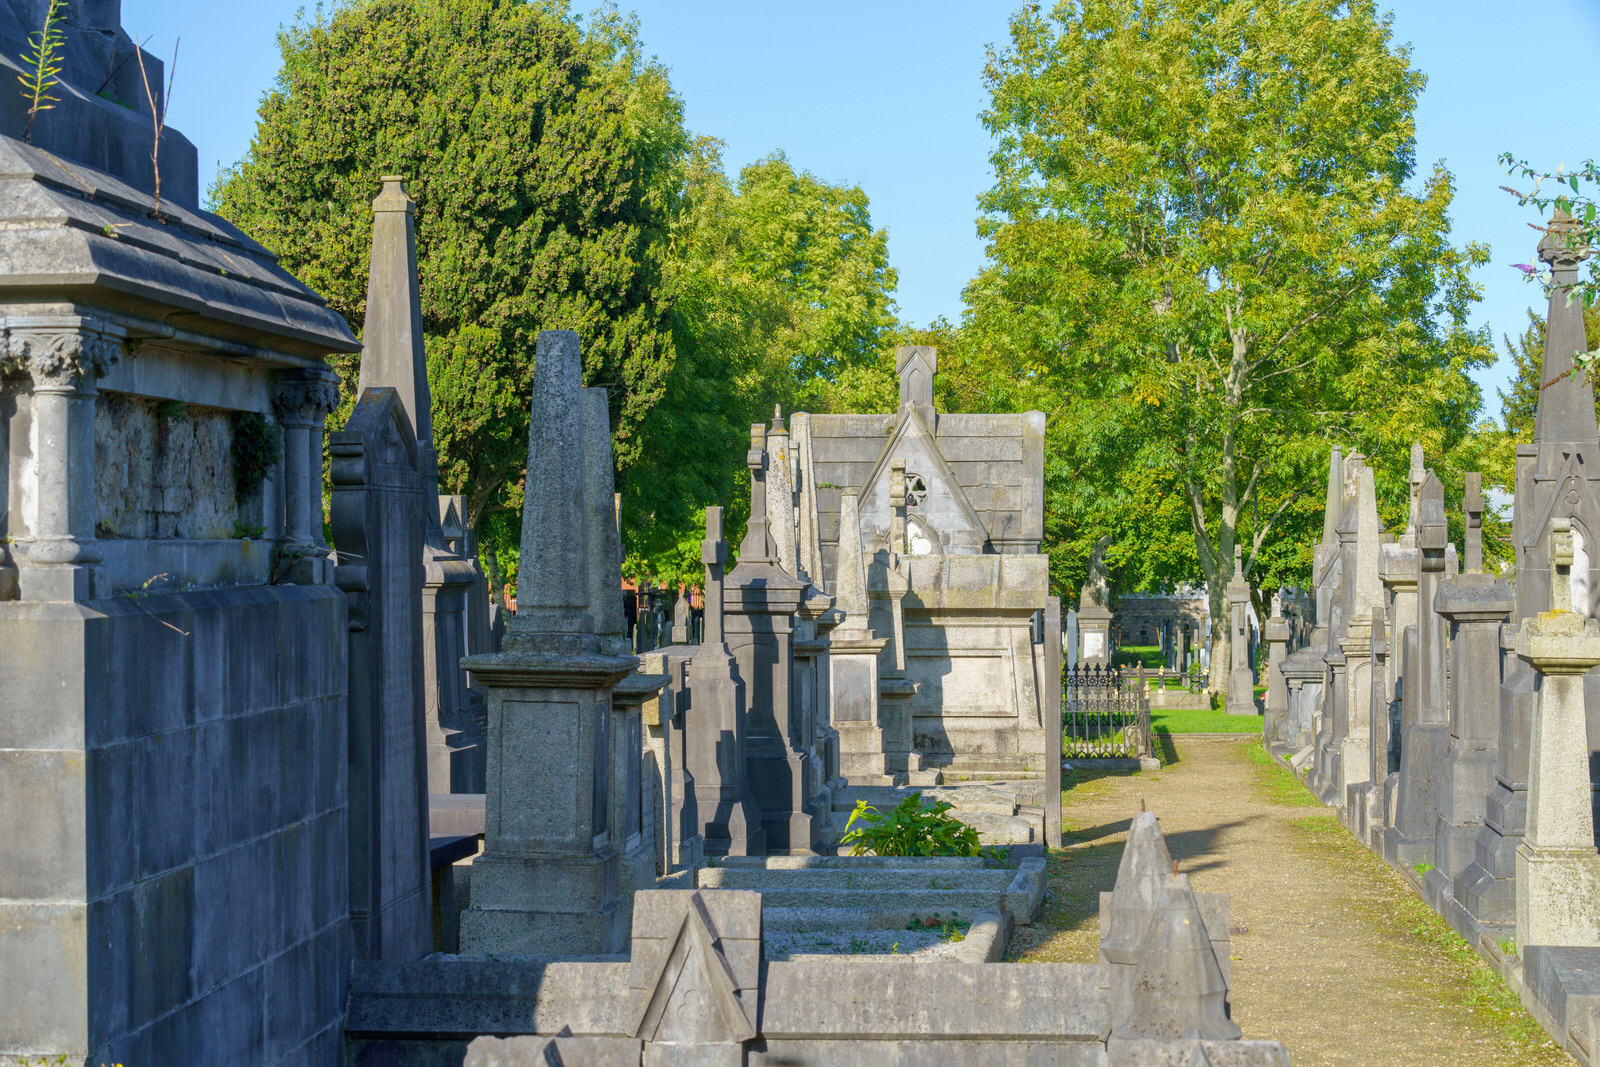 THE OLDER SECTION OF GLASNEVIN CEMETERY [I USED A SONY 70-200MM GM LENS] 014